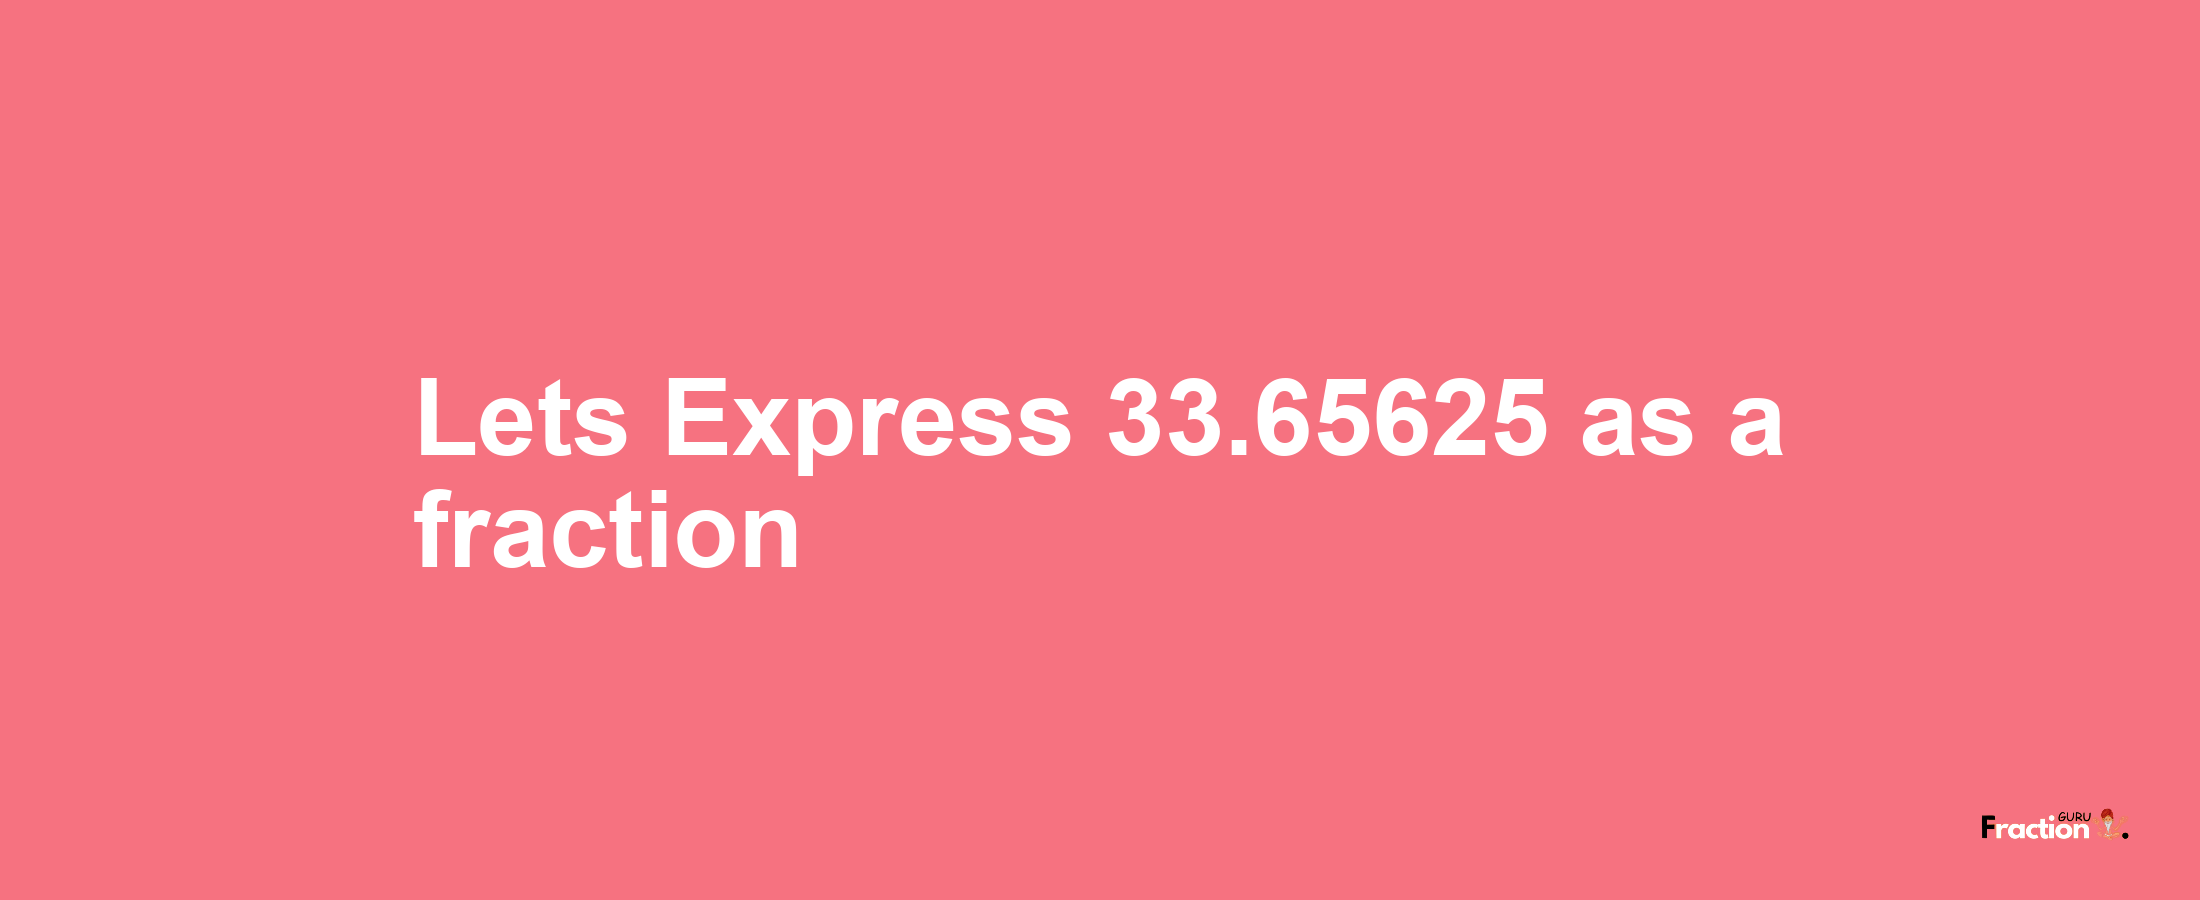 Lets Express 33.65625 as afraction